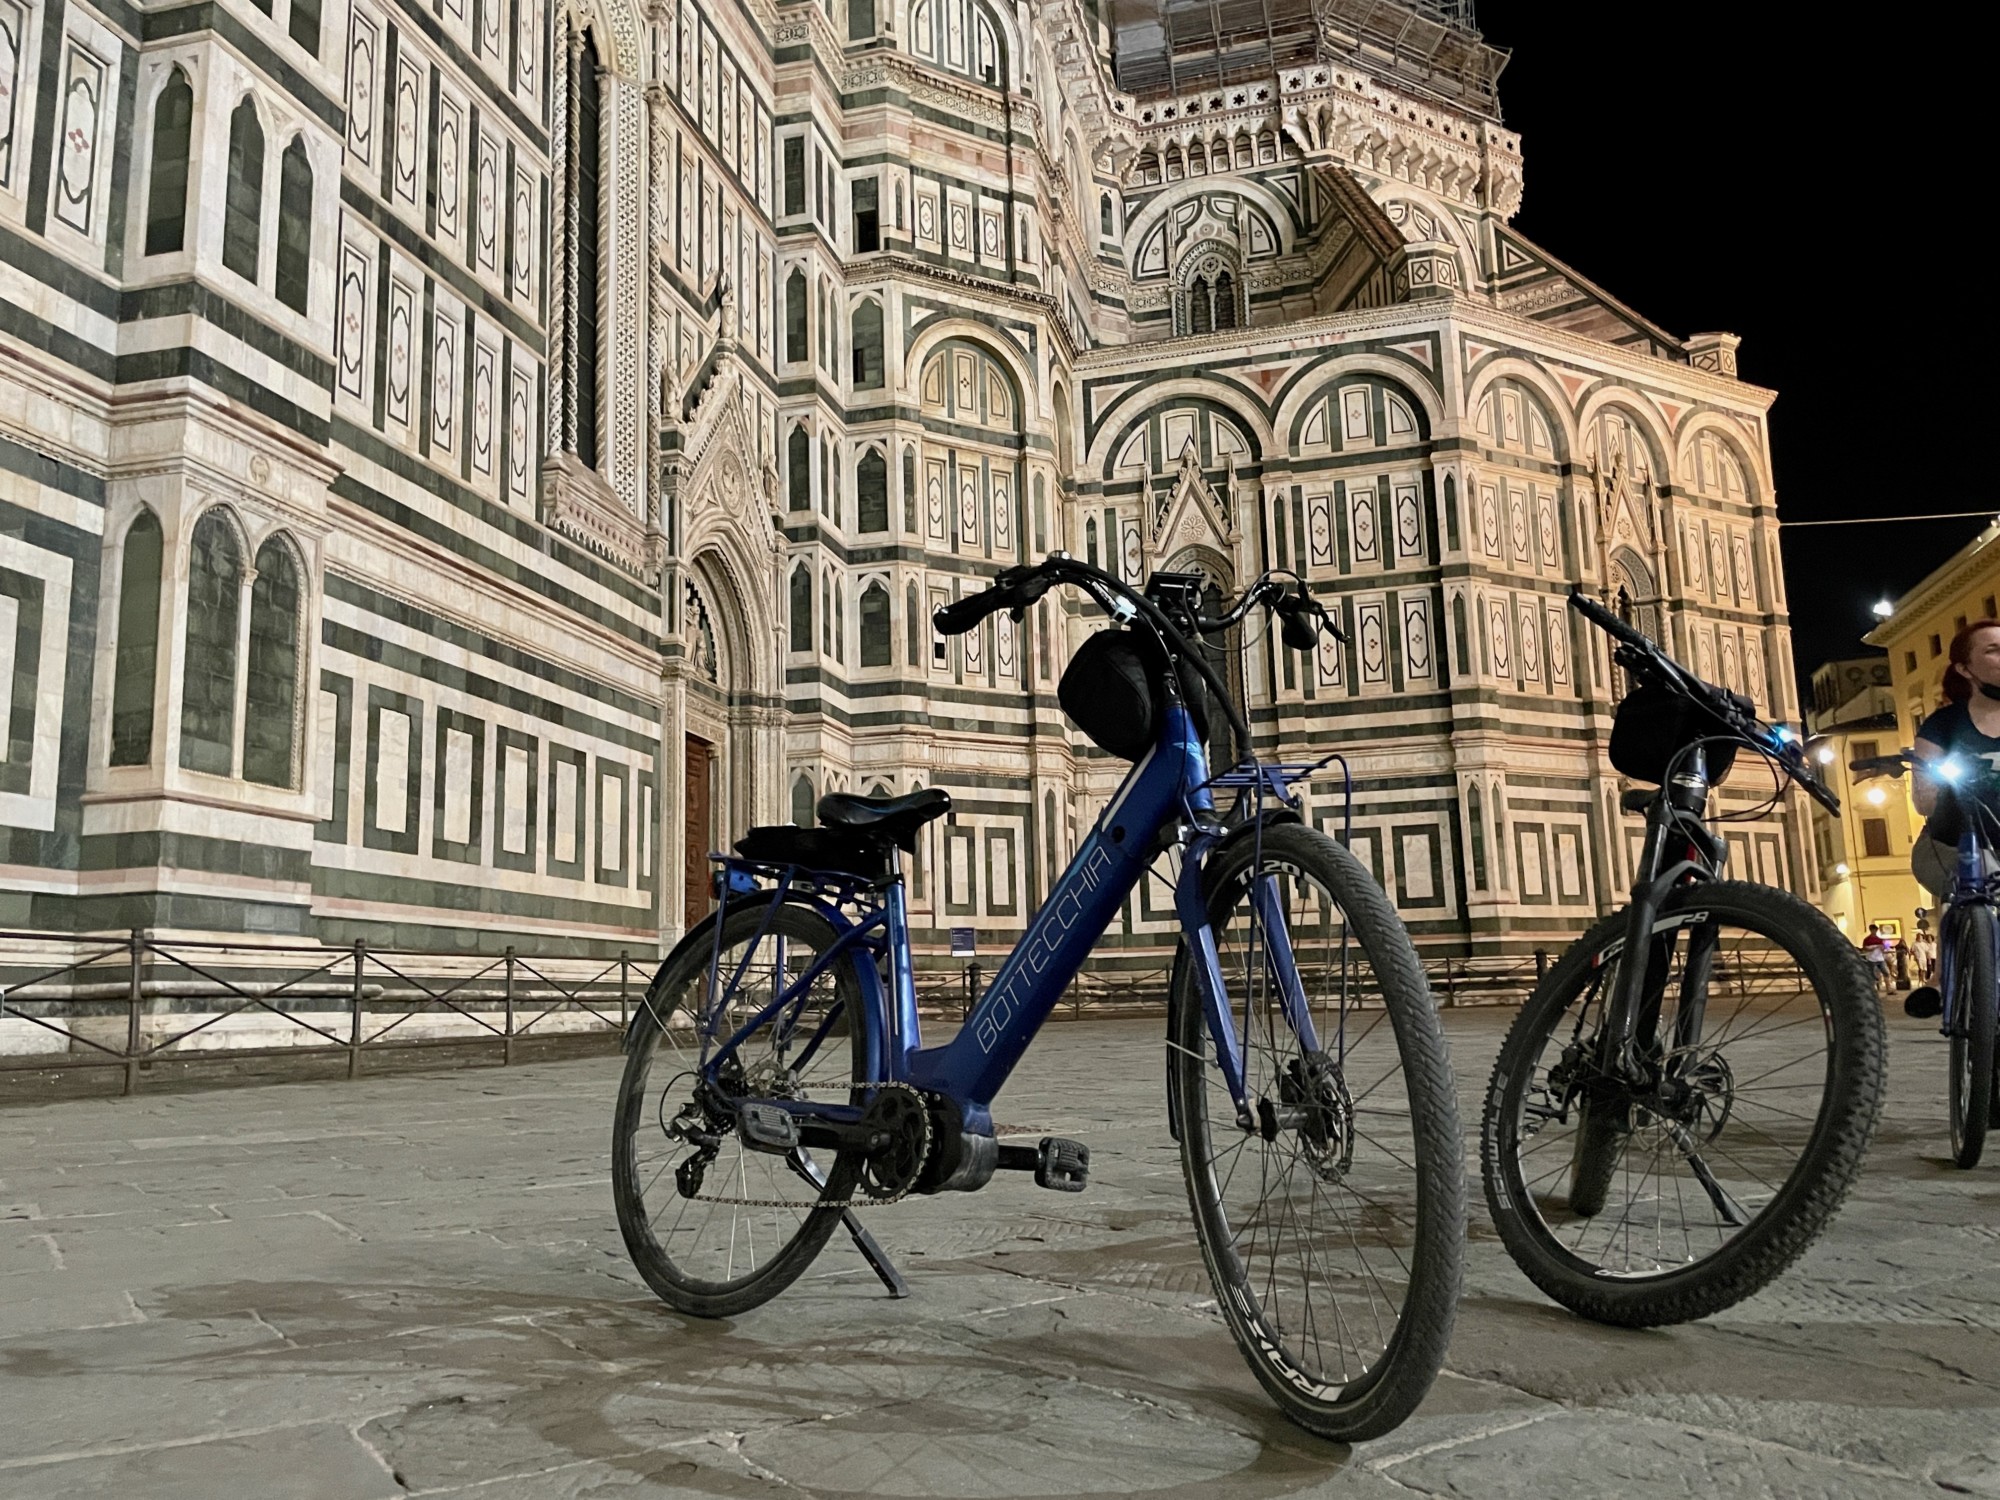 Ebike at Duomo in Florence Italy at night